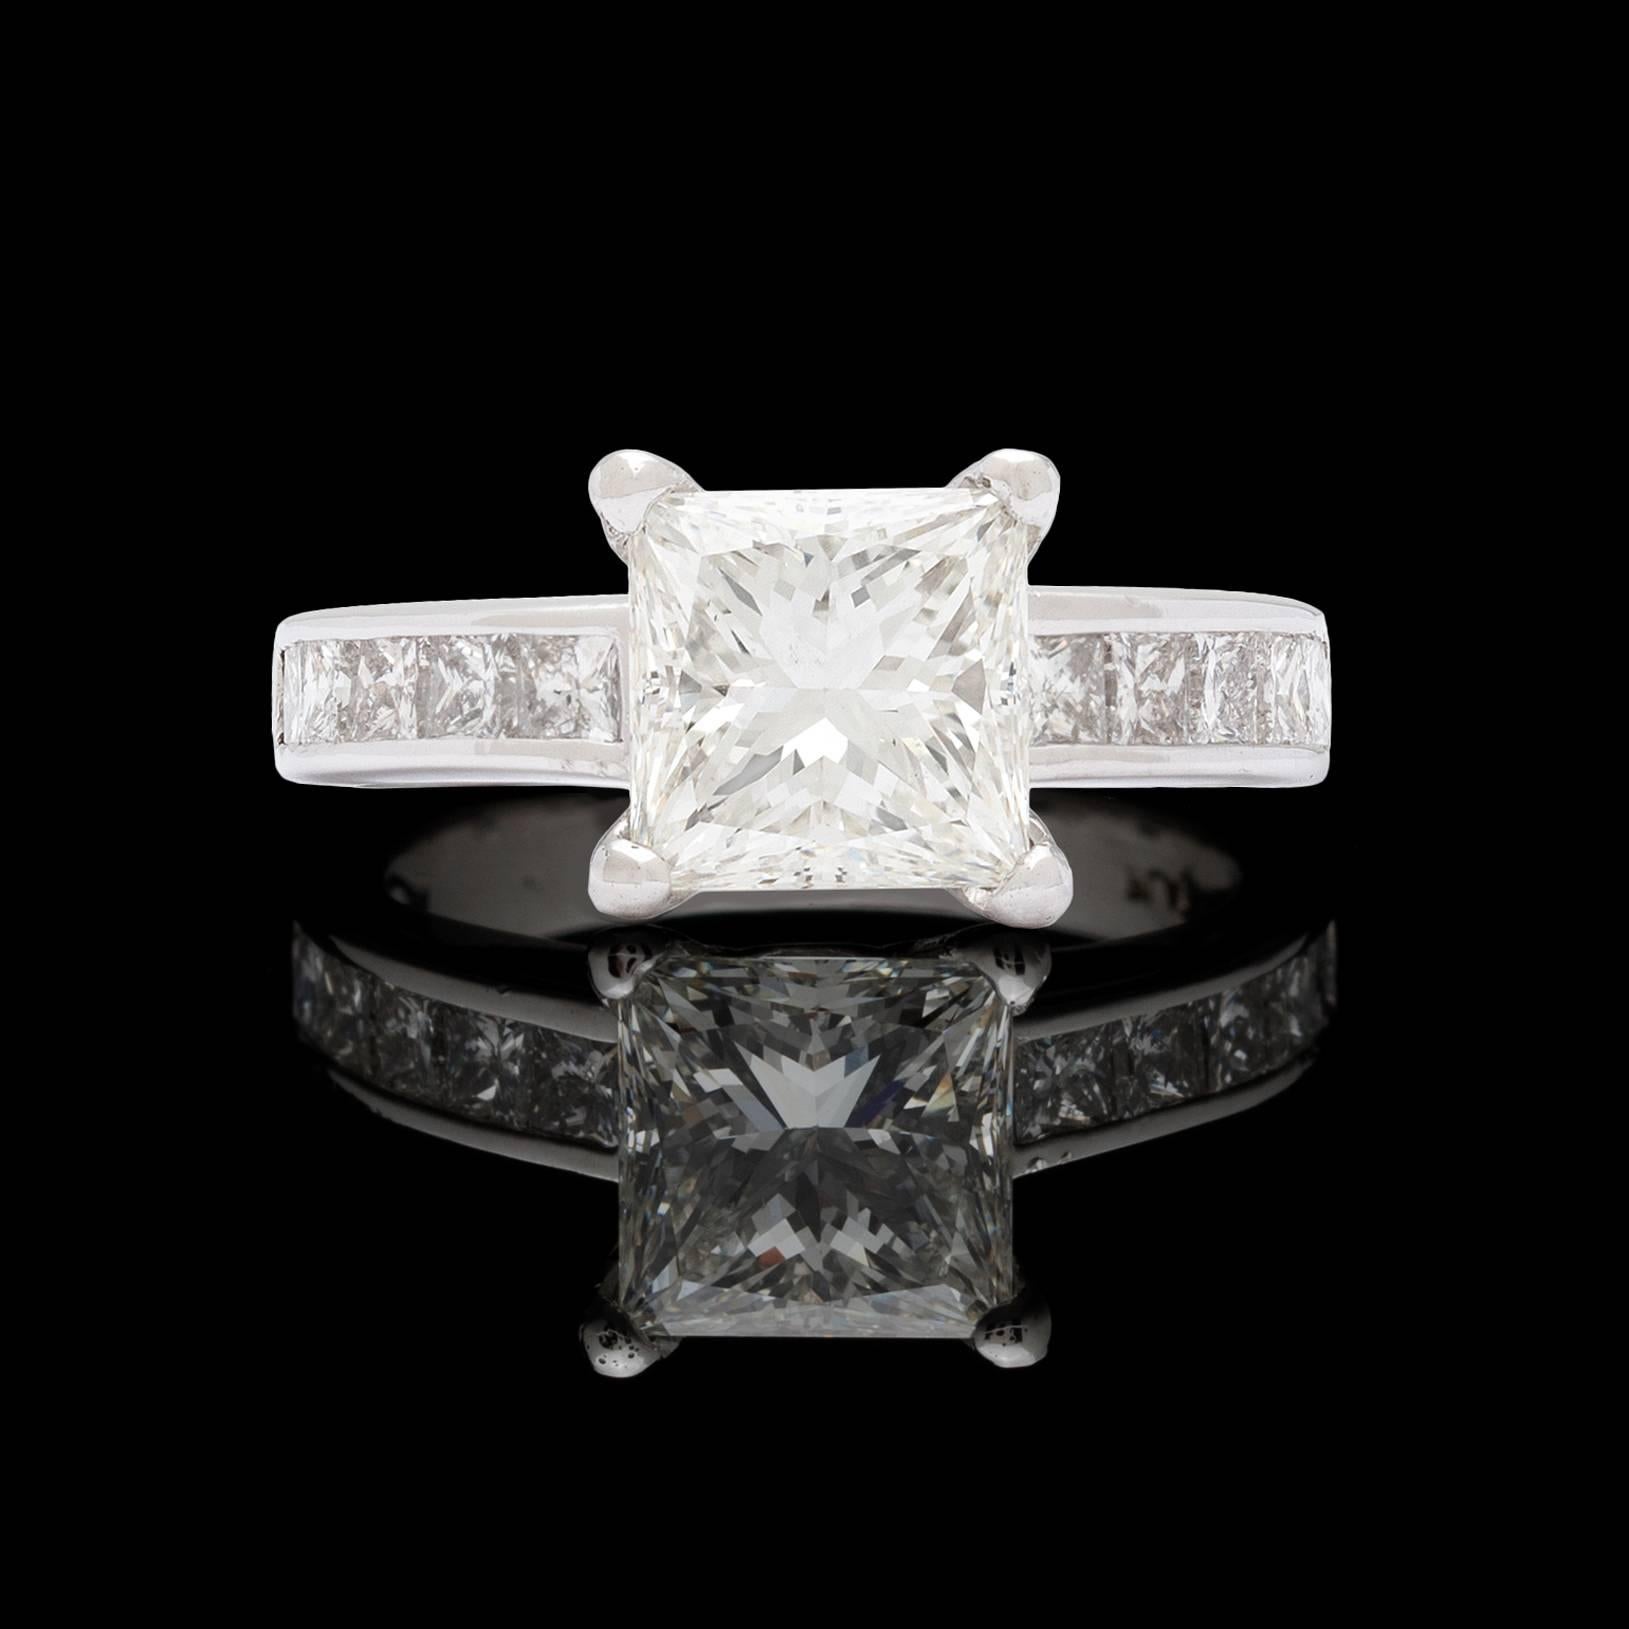 Platinum engagement ring featuring a GIA 2.09 carat modified square brilliant cut diamond accented with 10 princess cut diamonds for a total approximate weight of 1.20 carat. The center stone is H color and SI1 clarity. The ring is currently a size